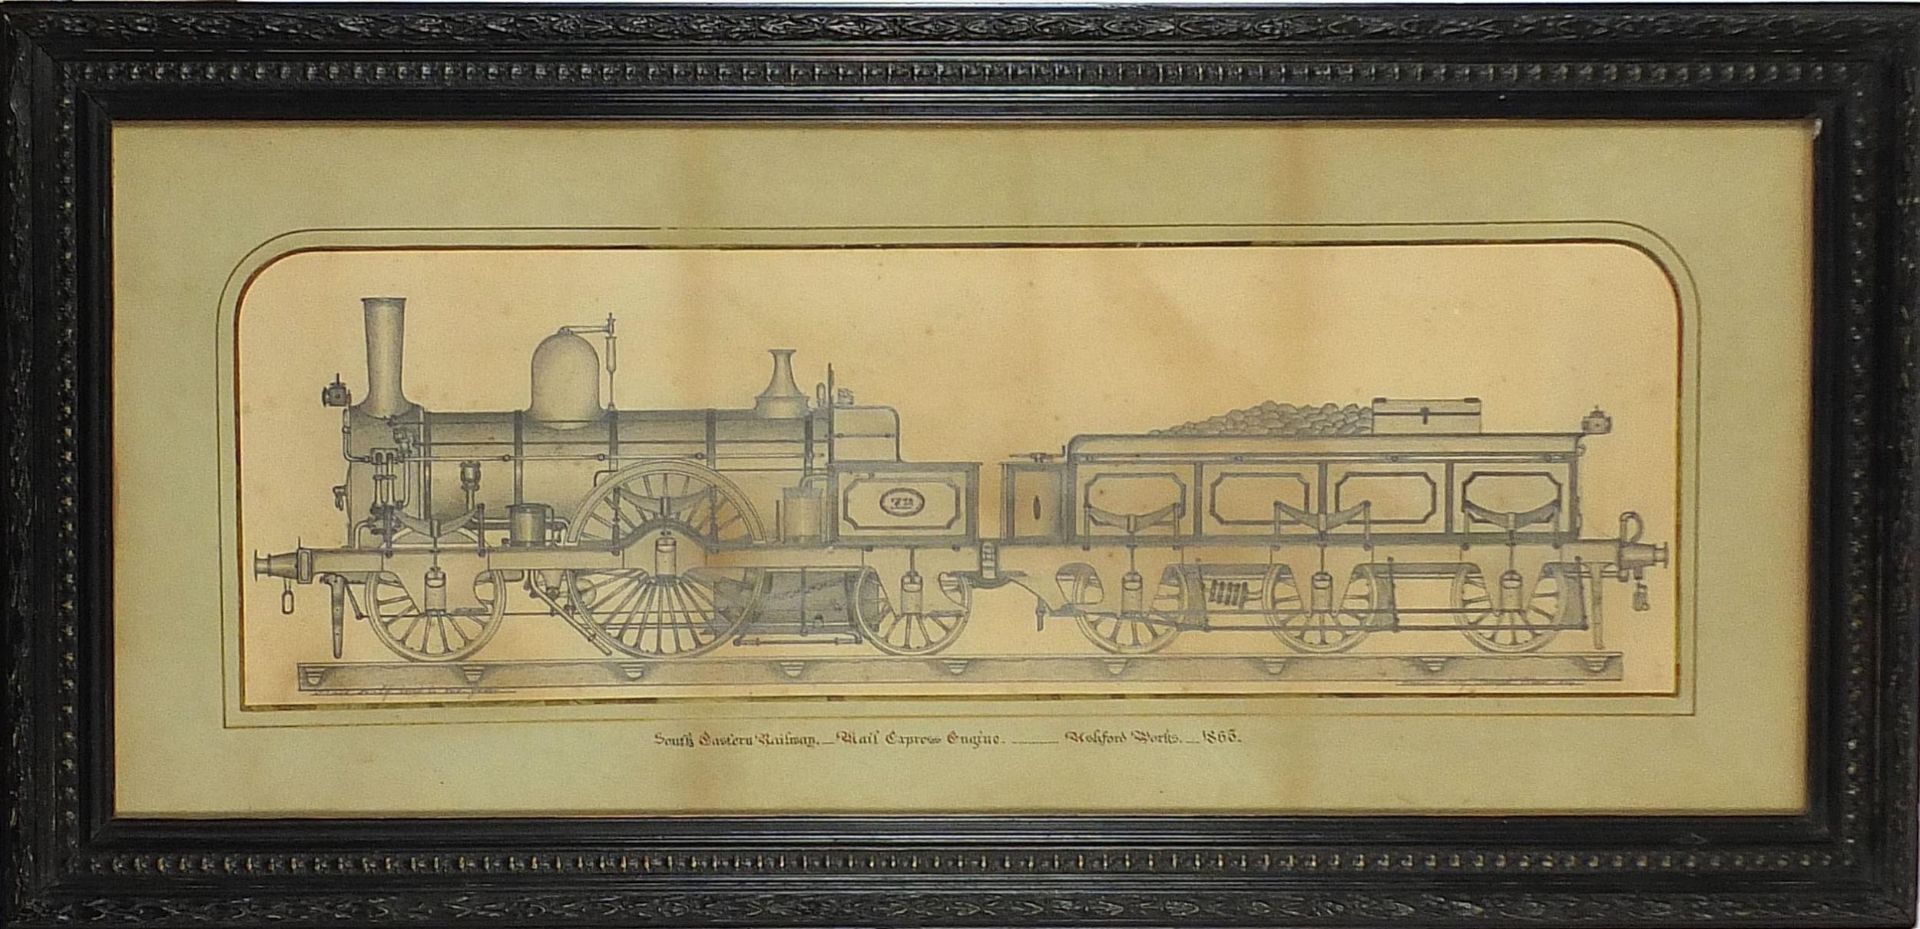 South Eastern Railway, Mail Express engine, Ashford Works, 1865, 19th century pencil drawing, - Image 2 of 5